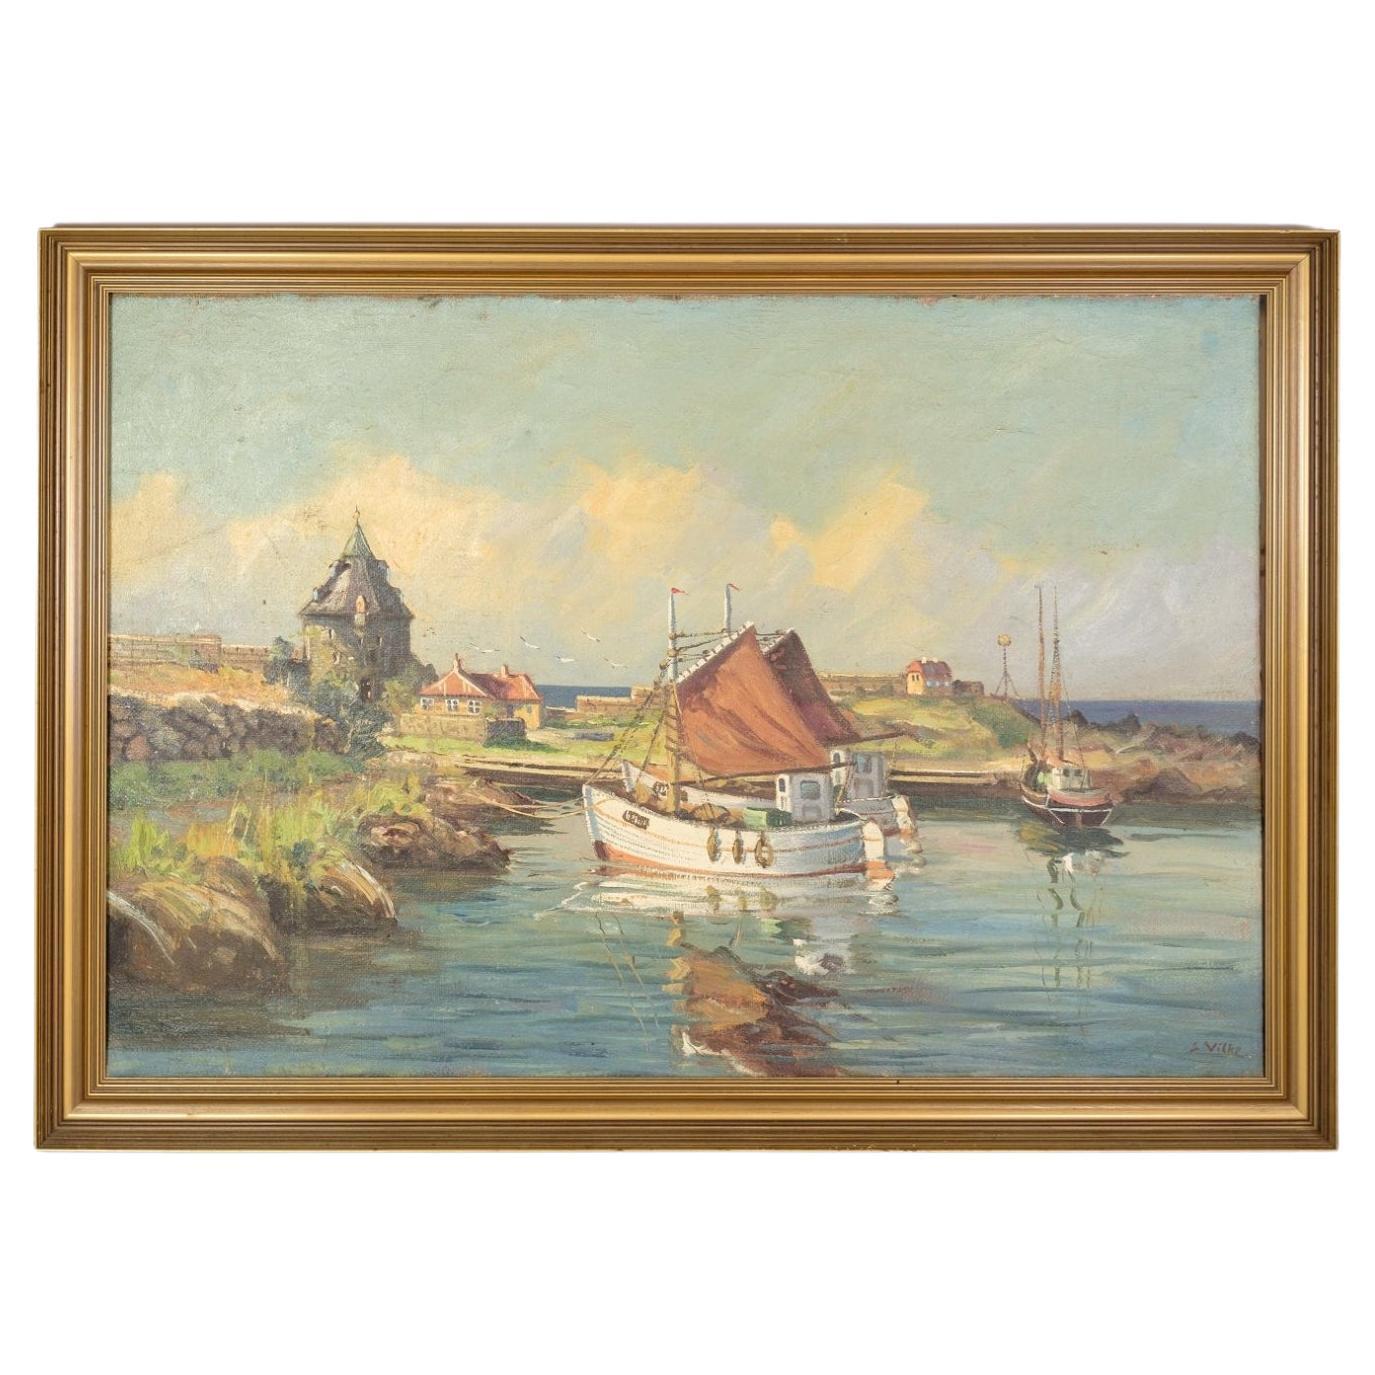 Large Oil Painting On Canvas With Motif Of Fishing Boats Near Shore From 1930s For Sale